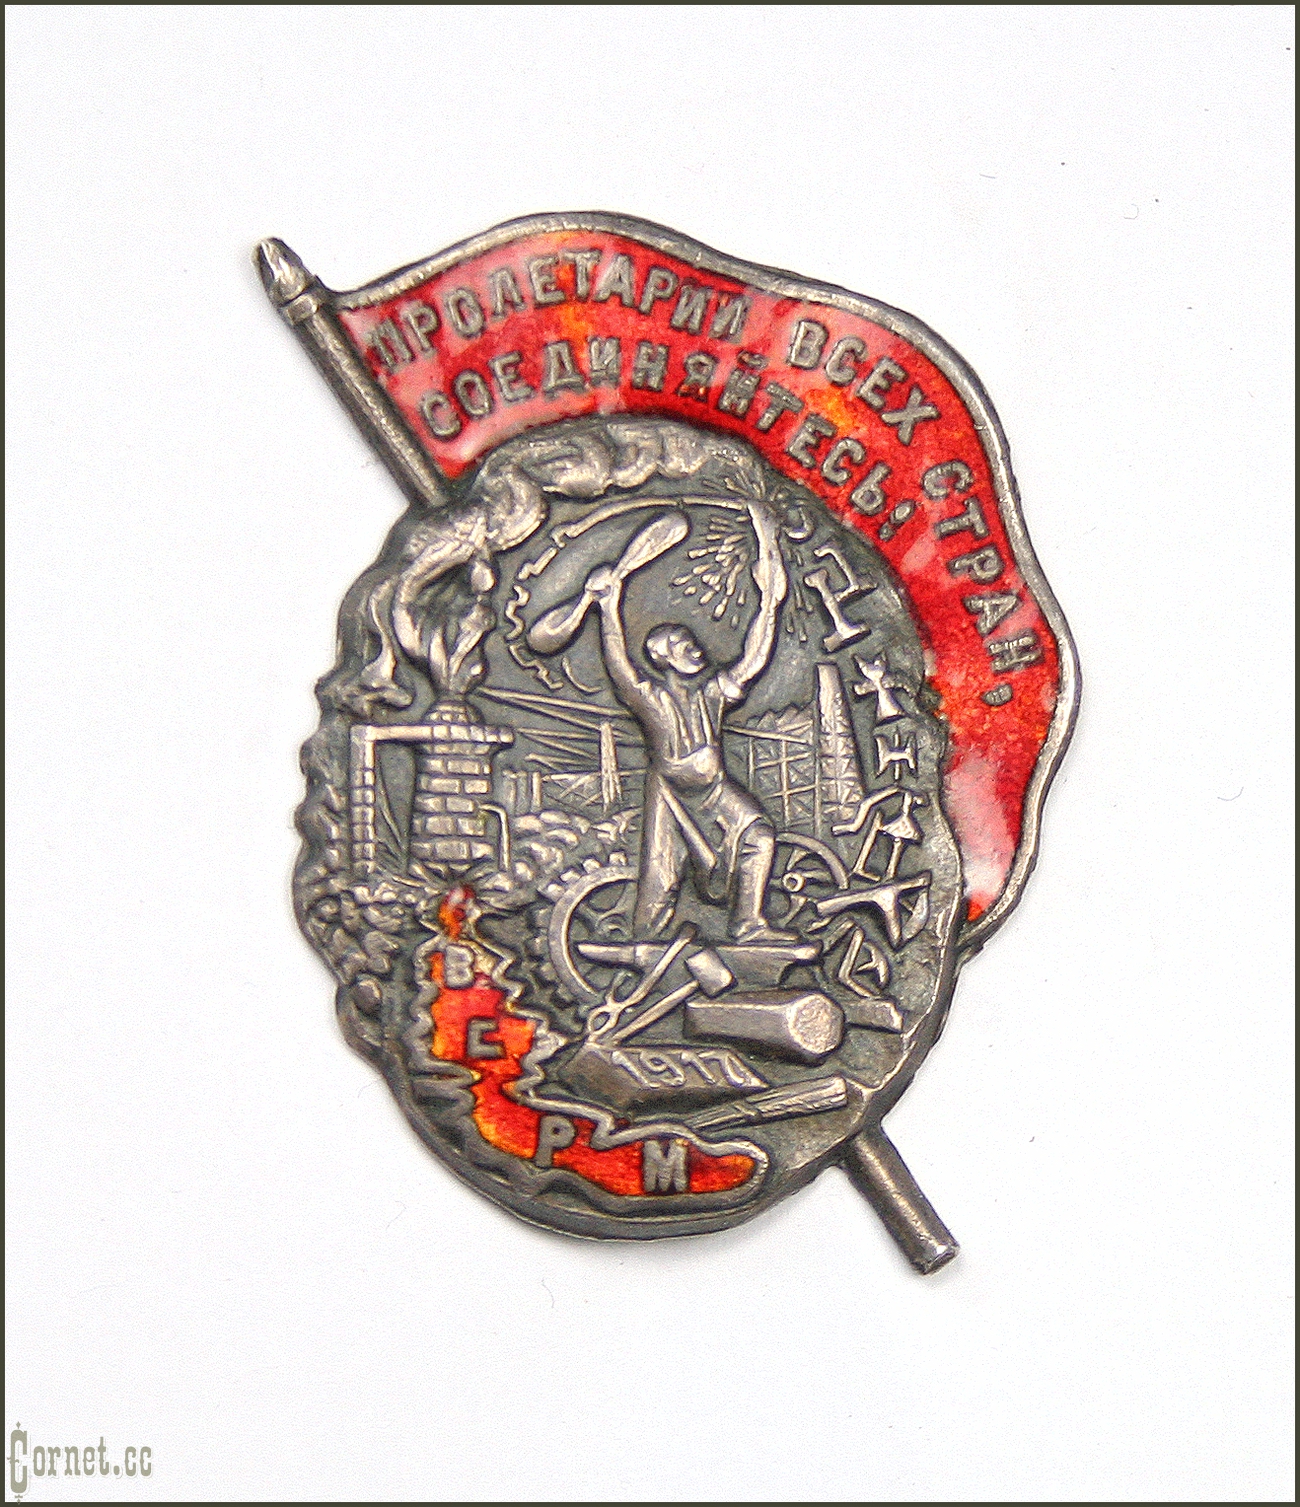 Award badge of the All-USSR Union of Metal Workers (VSRM)